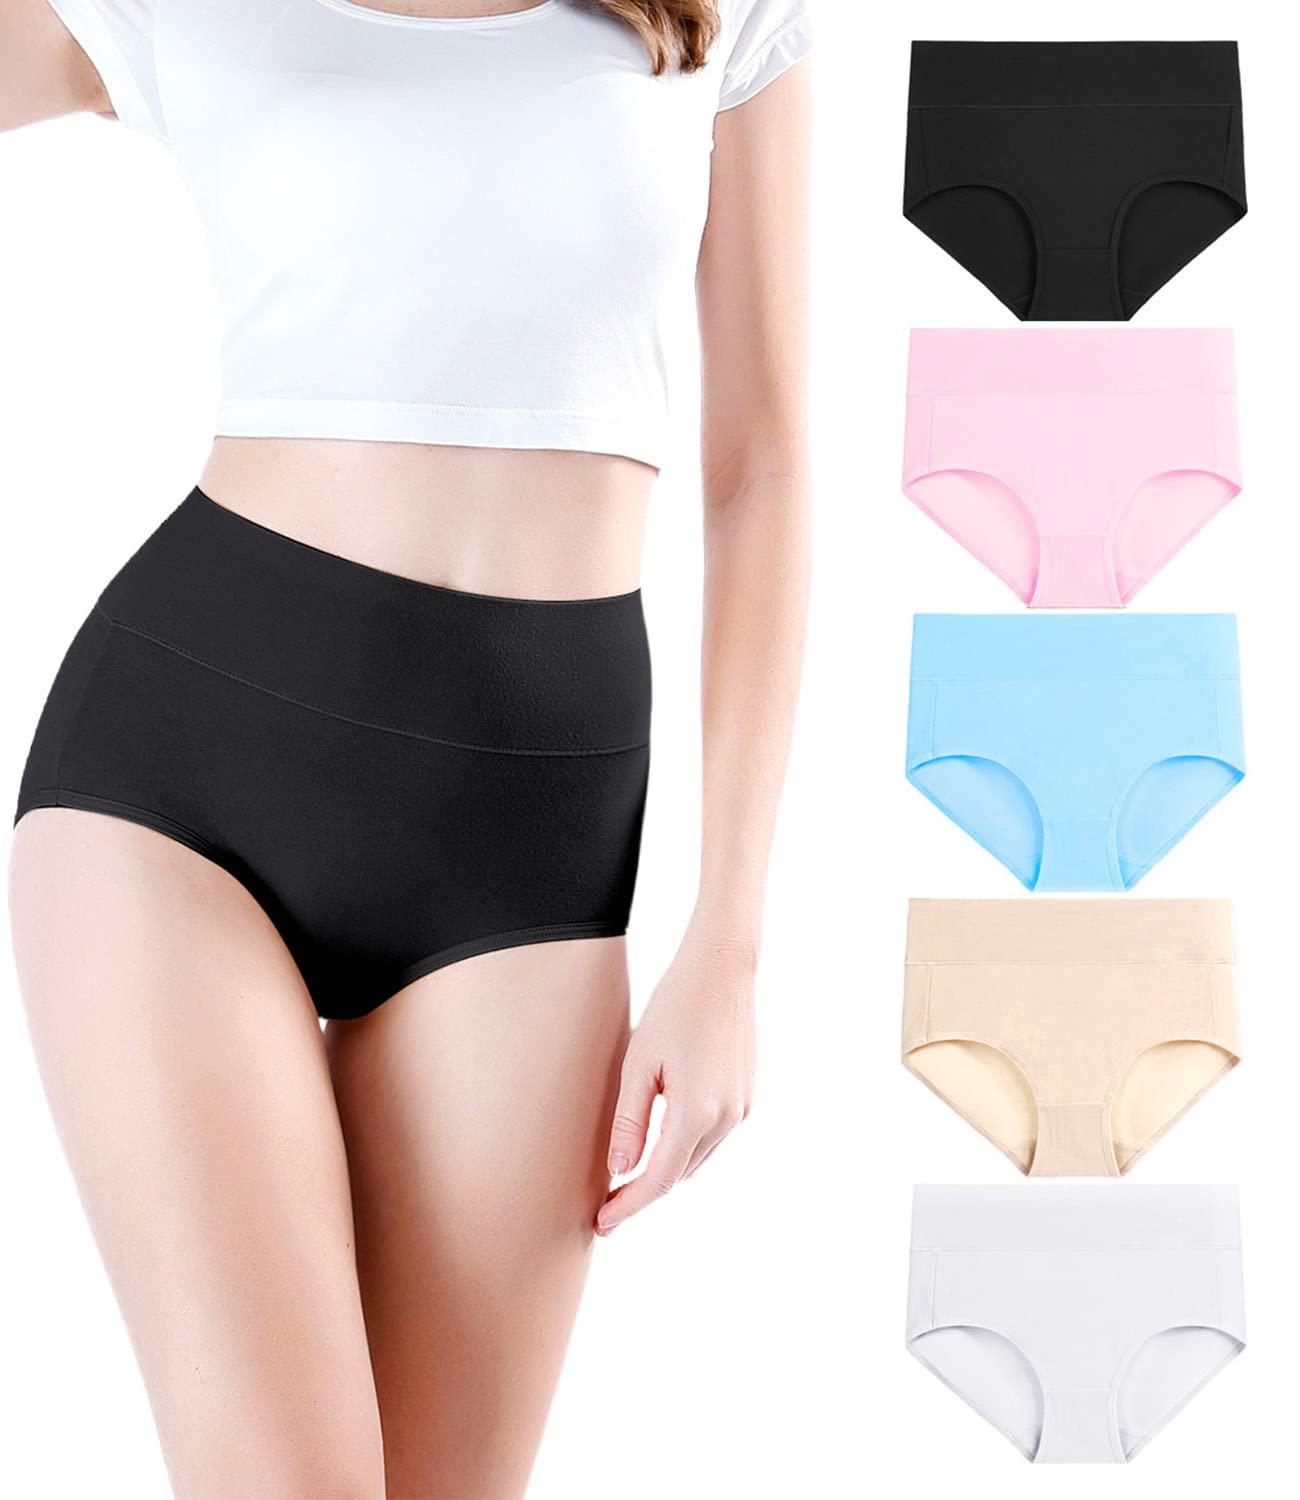 Wirarpa wirarpa Women's Cotton Underwear High Waist Briefs Full Coverage  Panties Ladies Comfortable Underpants 5 Pack Assorted Small